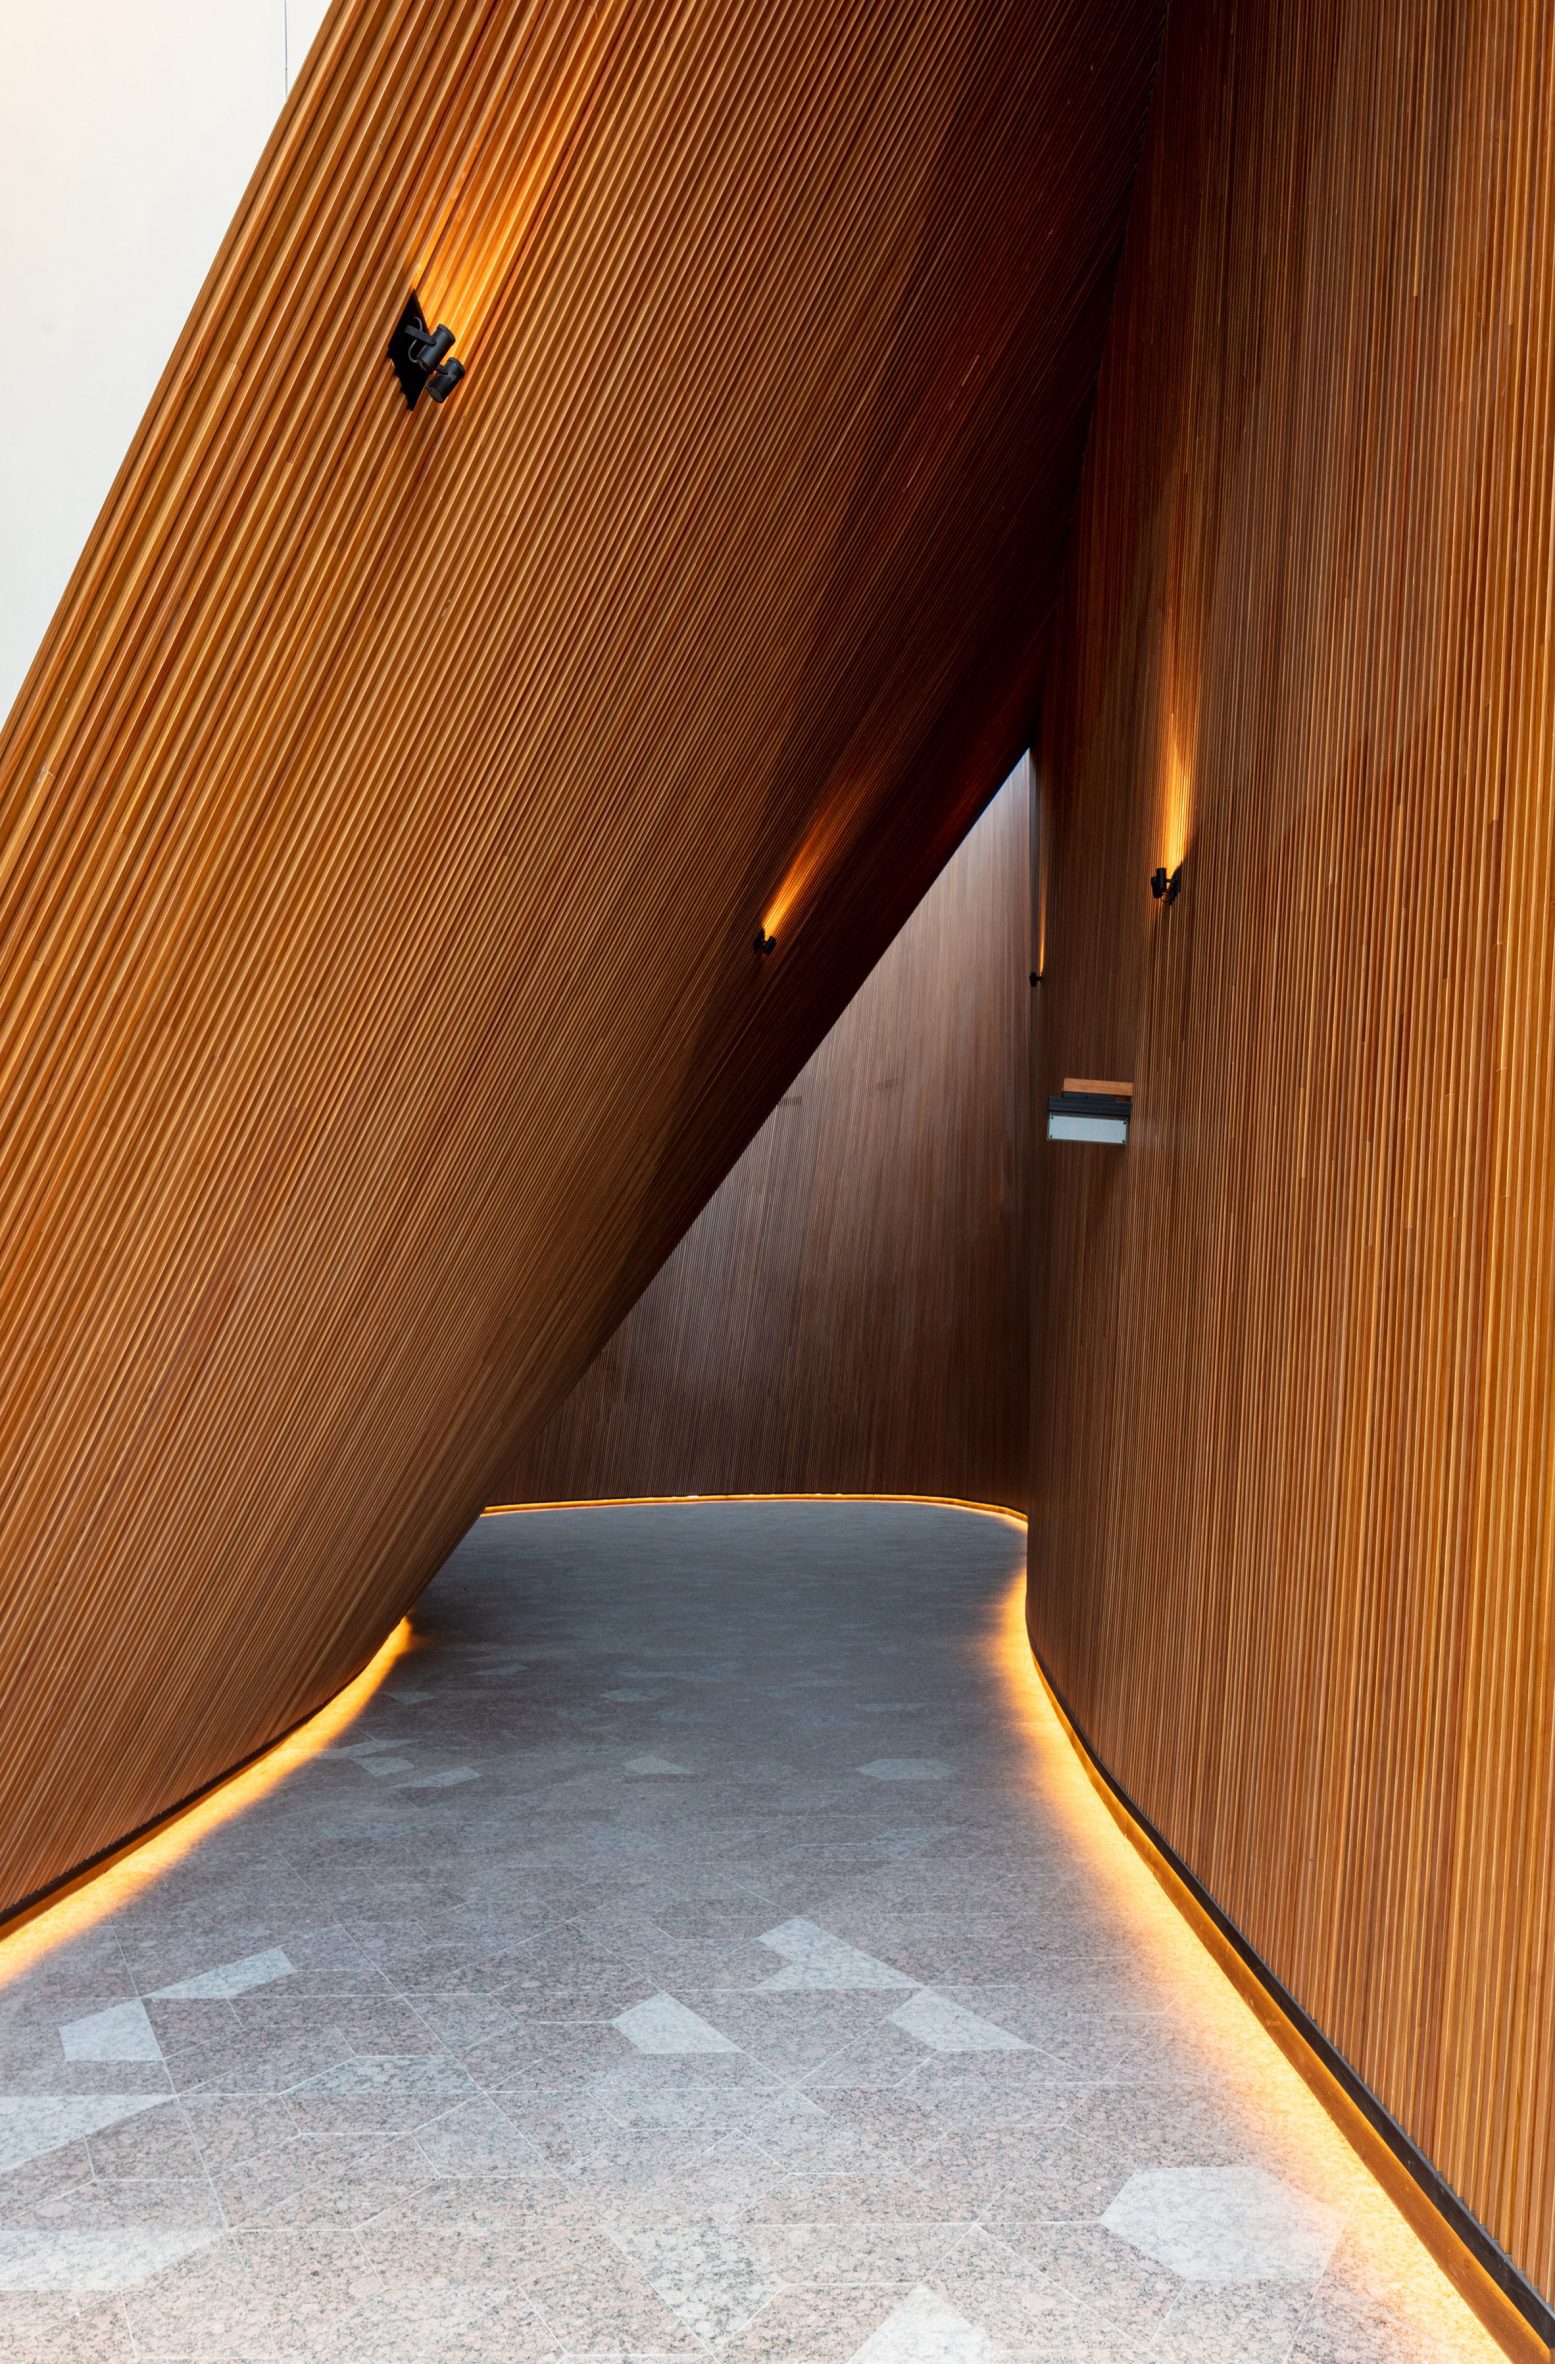 Timber-lined interior space